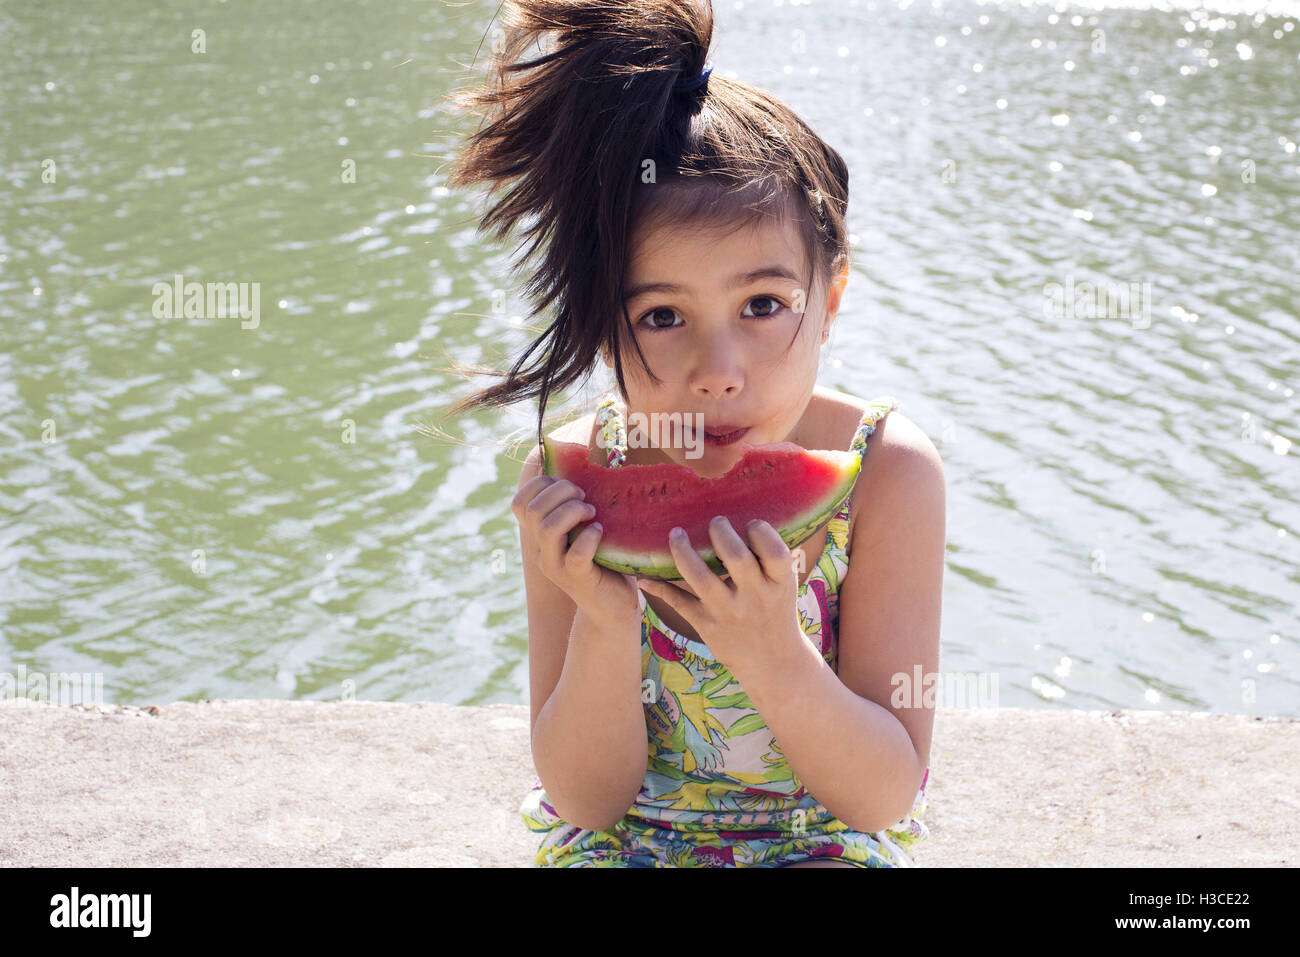 Girl eating watermelon outdoors Stock Photo